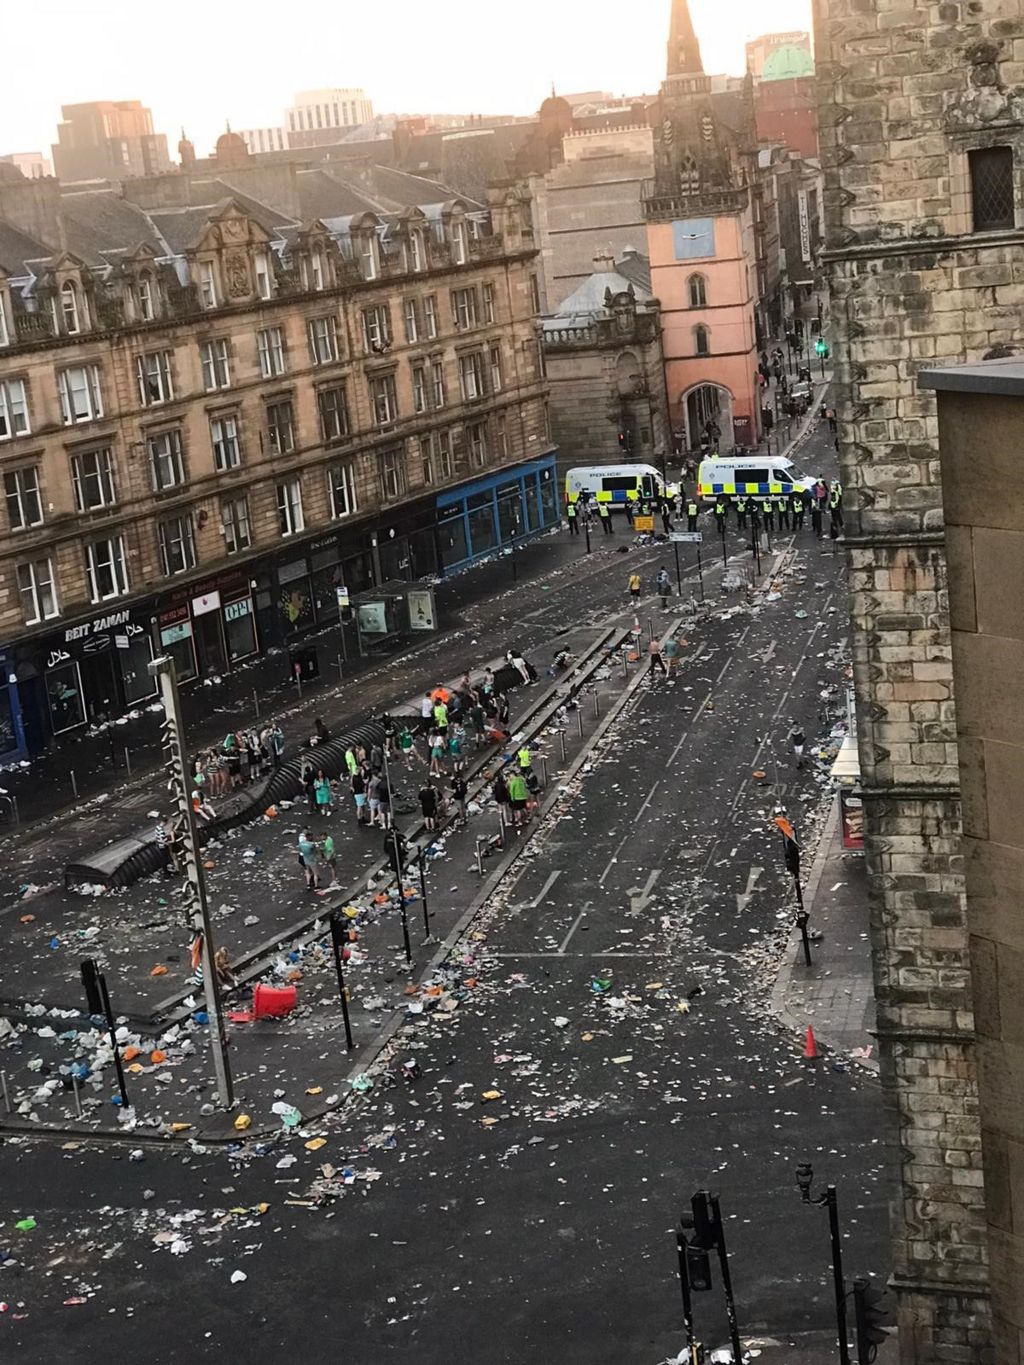 Birds eye view showing litter strewn streets as the sun rises at Glasgow Cross